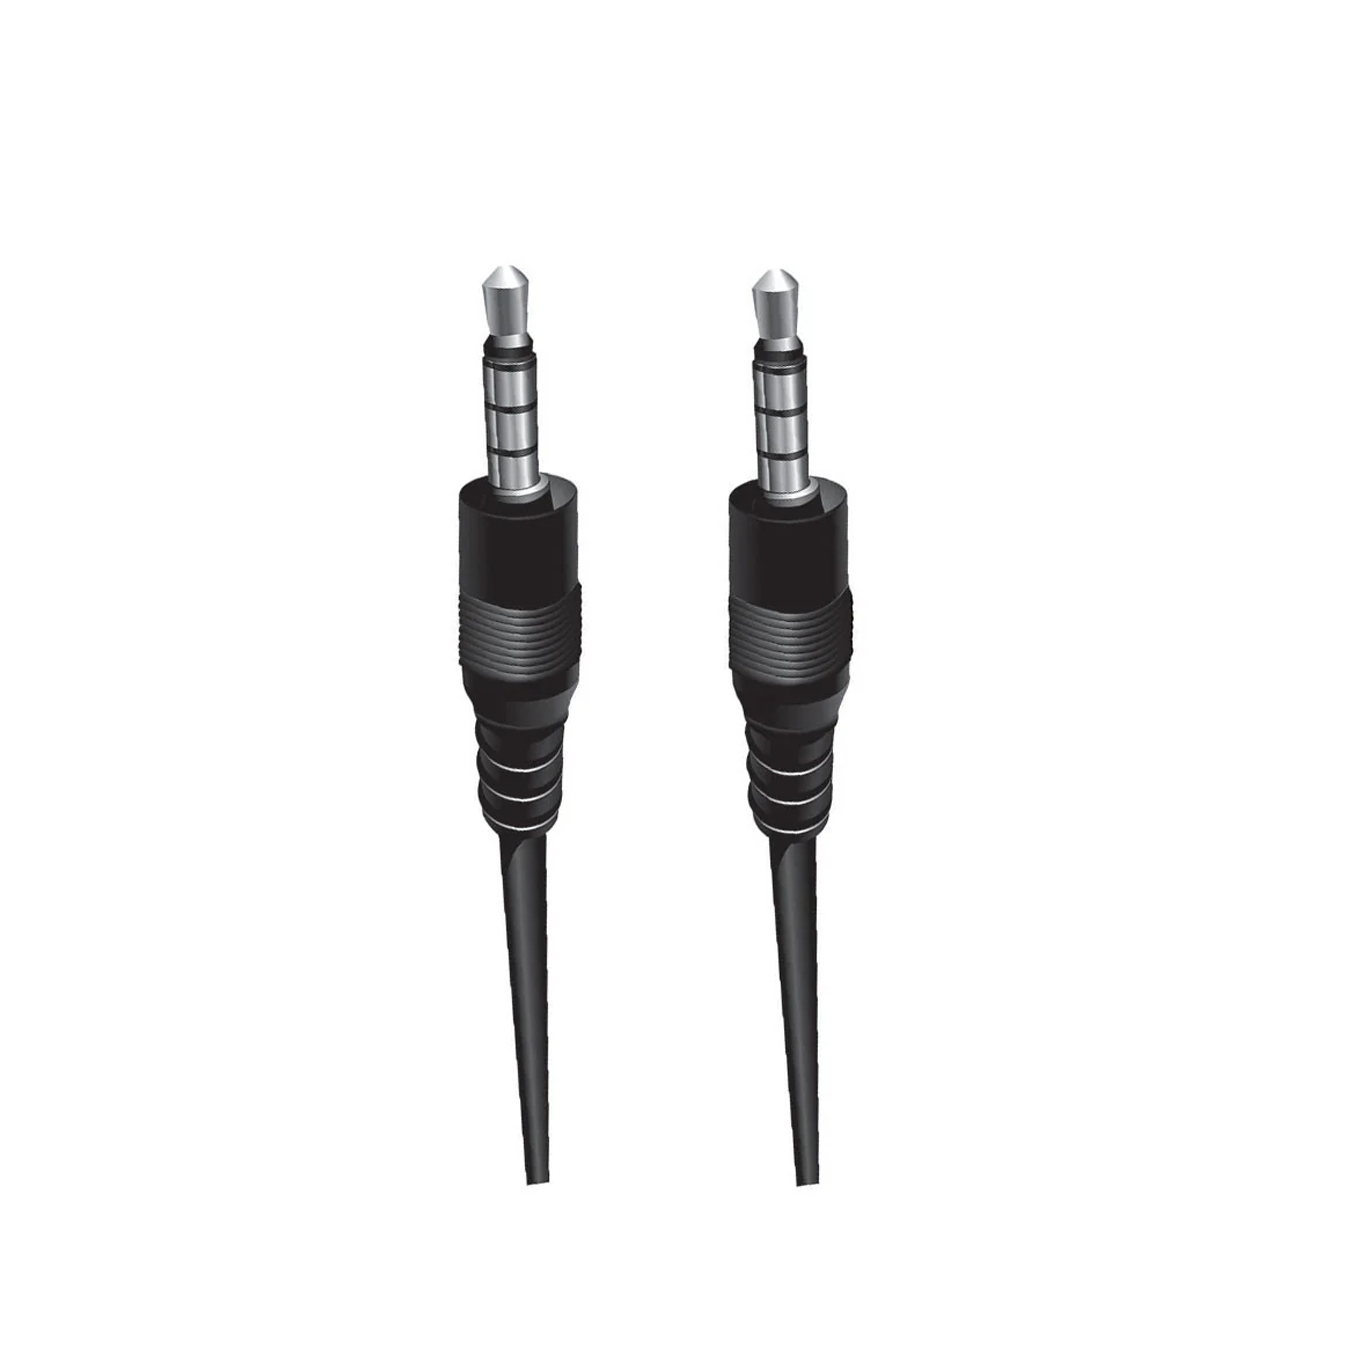 Cable 3.5 MM to 3.5MM sound 1 MT ARG CB-0035 Marca: Argom